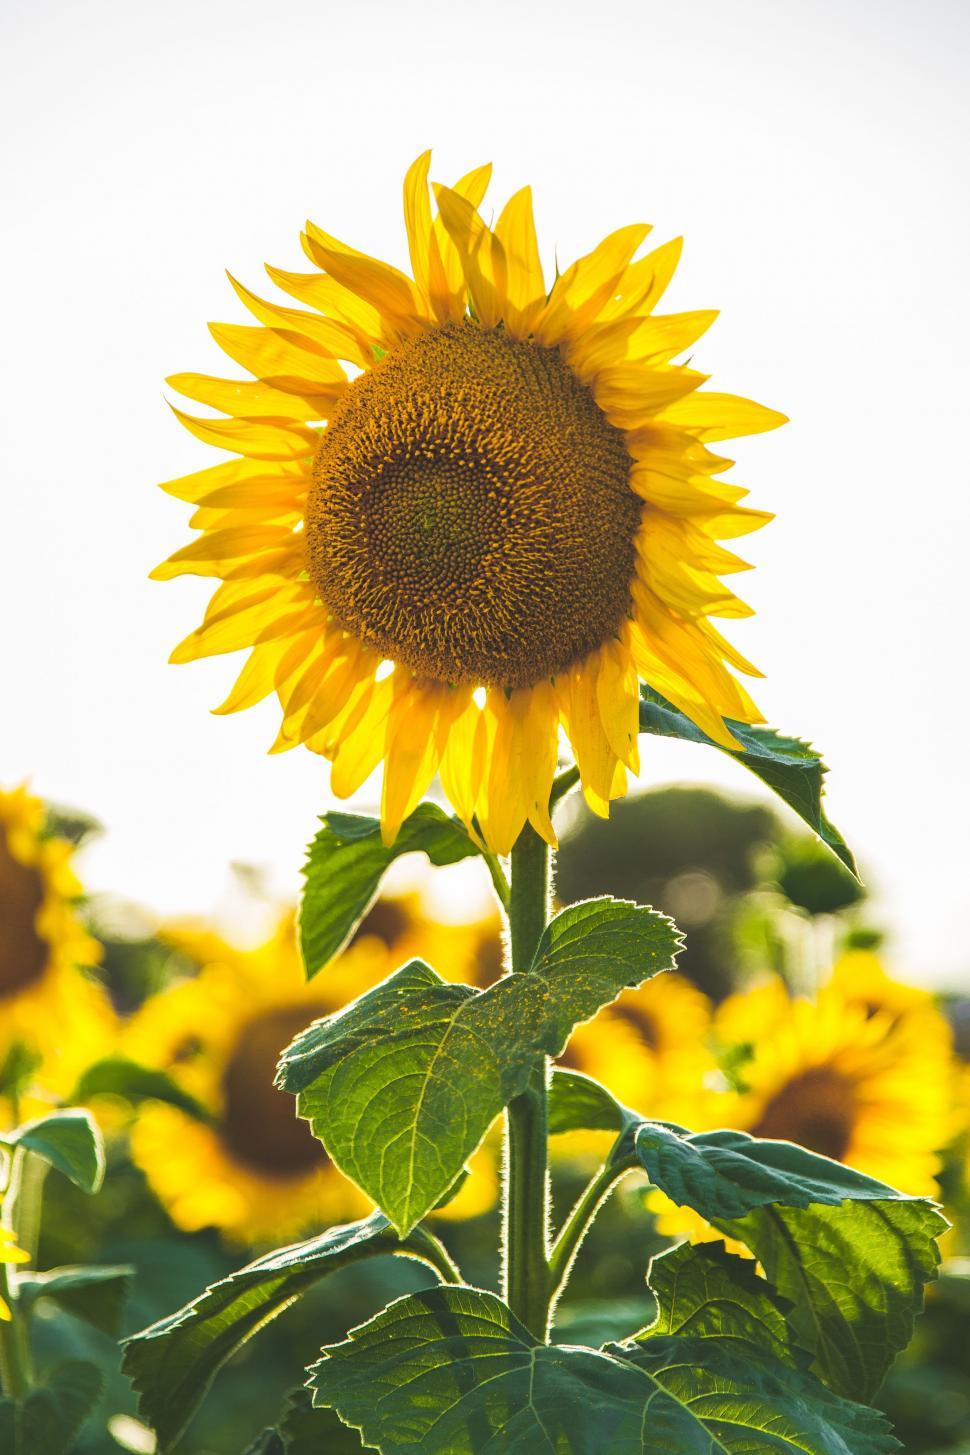 Free Image of A Large Sunflower Among Many in a Sunflower Field 